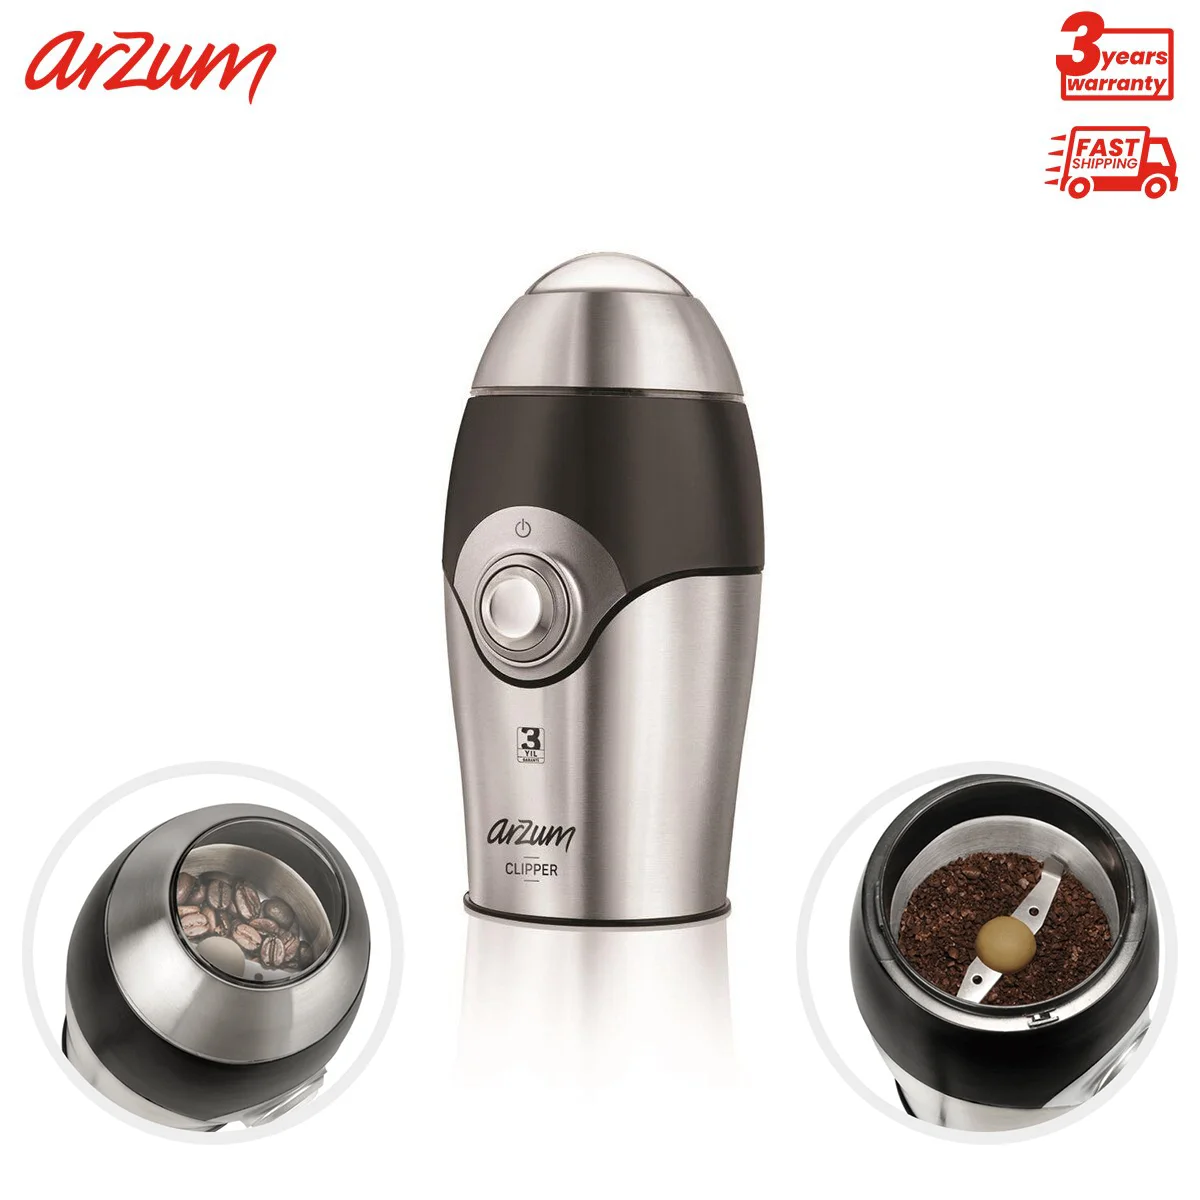 ARZUM Clipper Coffee Grinder with Stainless Steel Blades Turkish coffee Grinder Electric Coffee Beans Grinding Easy Use